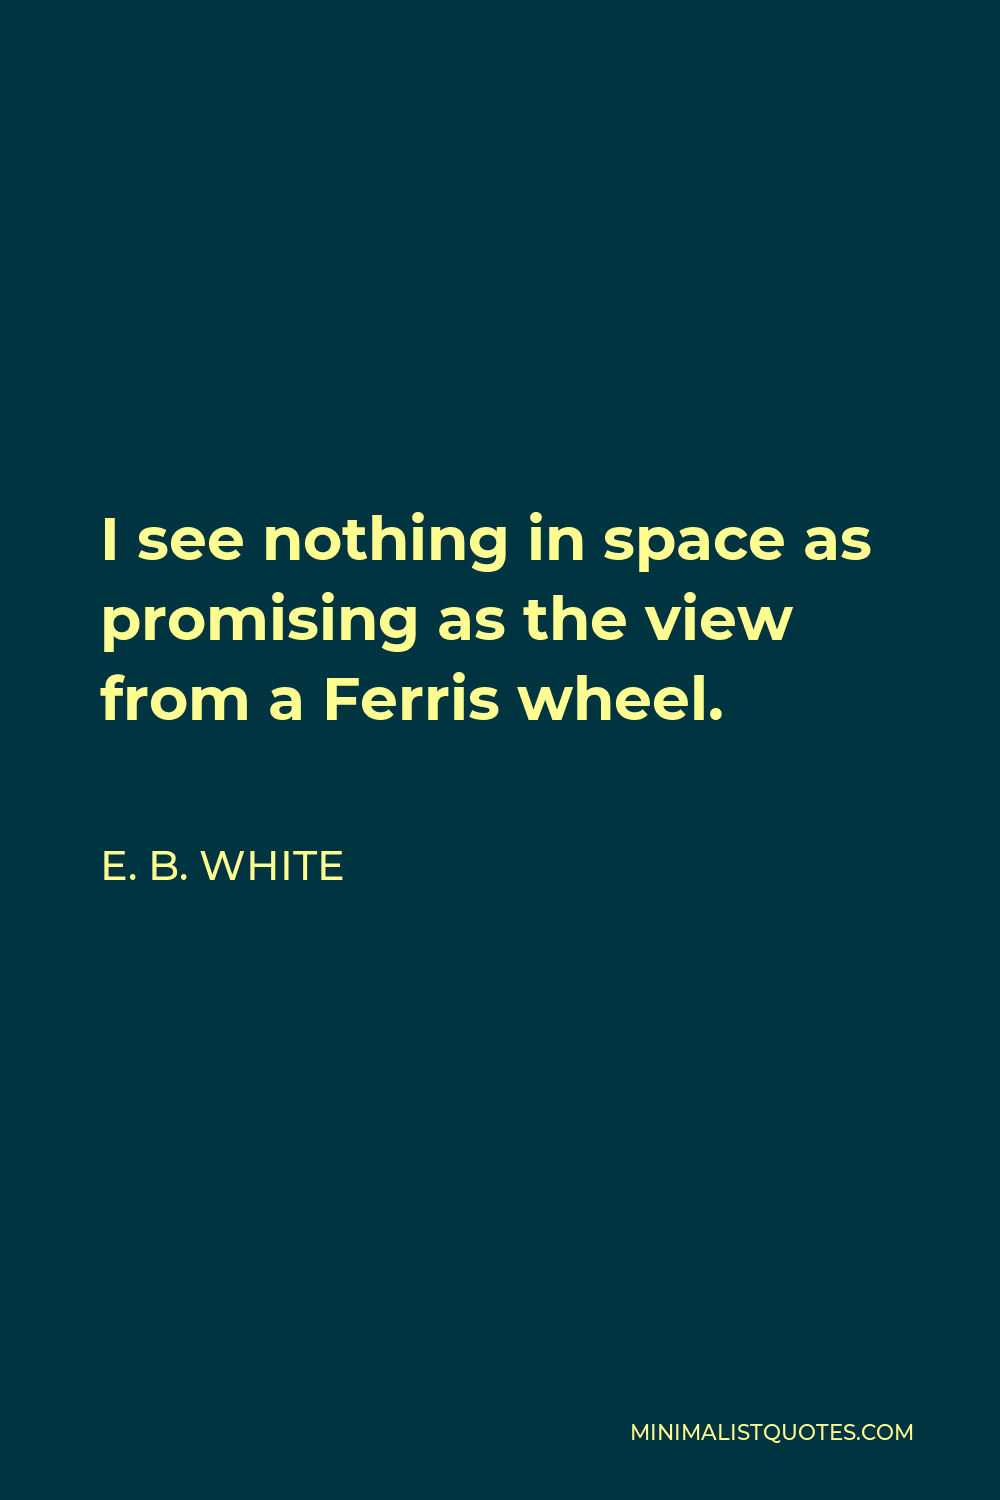 E. B. White Quote - I see nothing in space as promising as the view from a Ferris wheel.